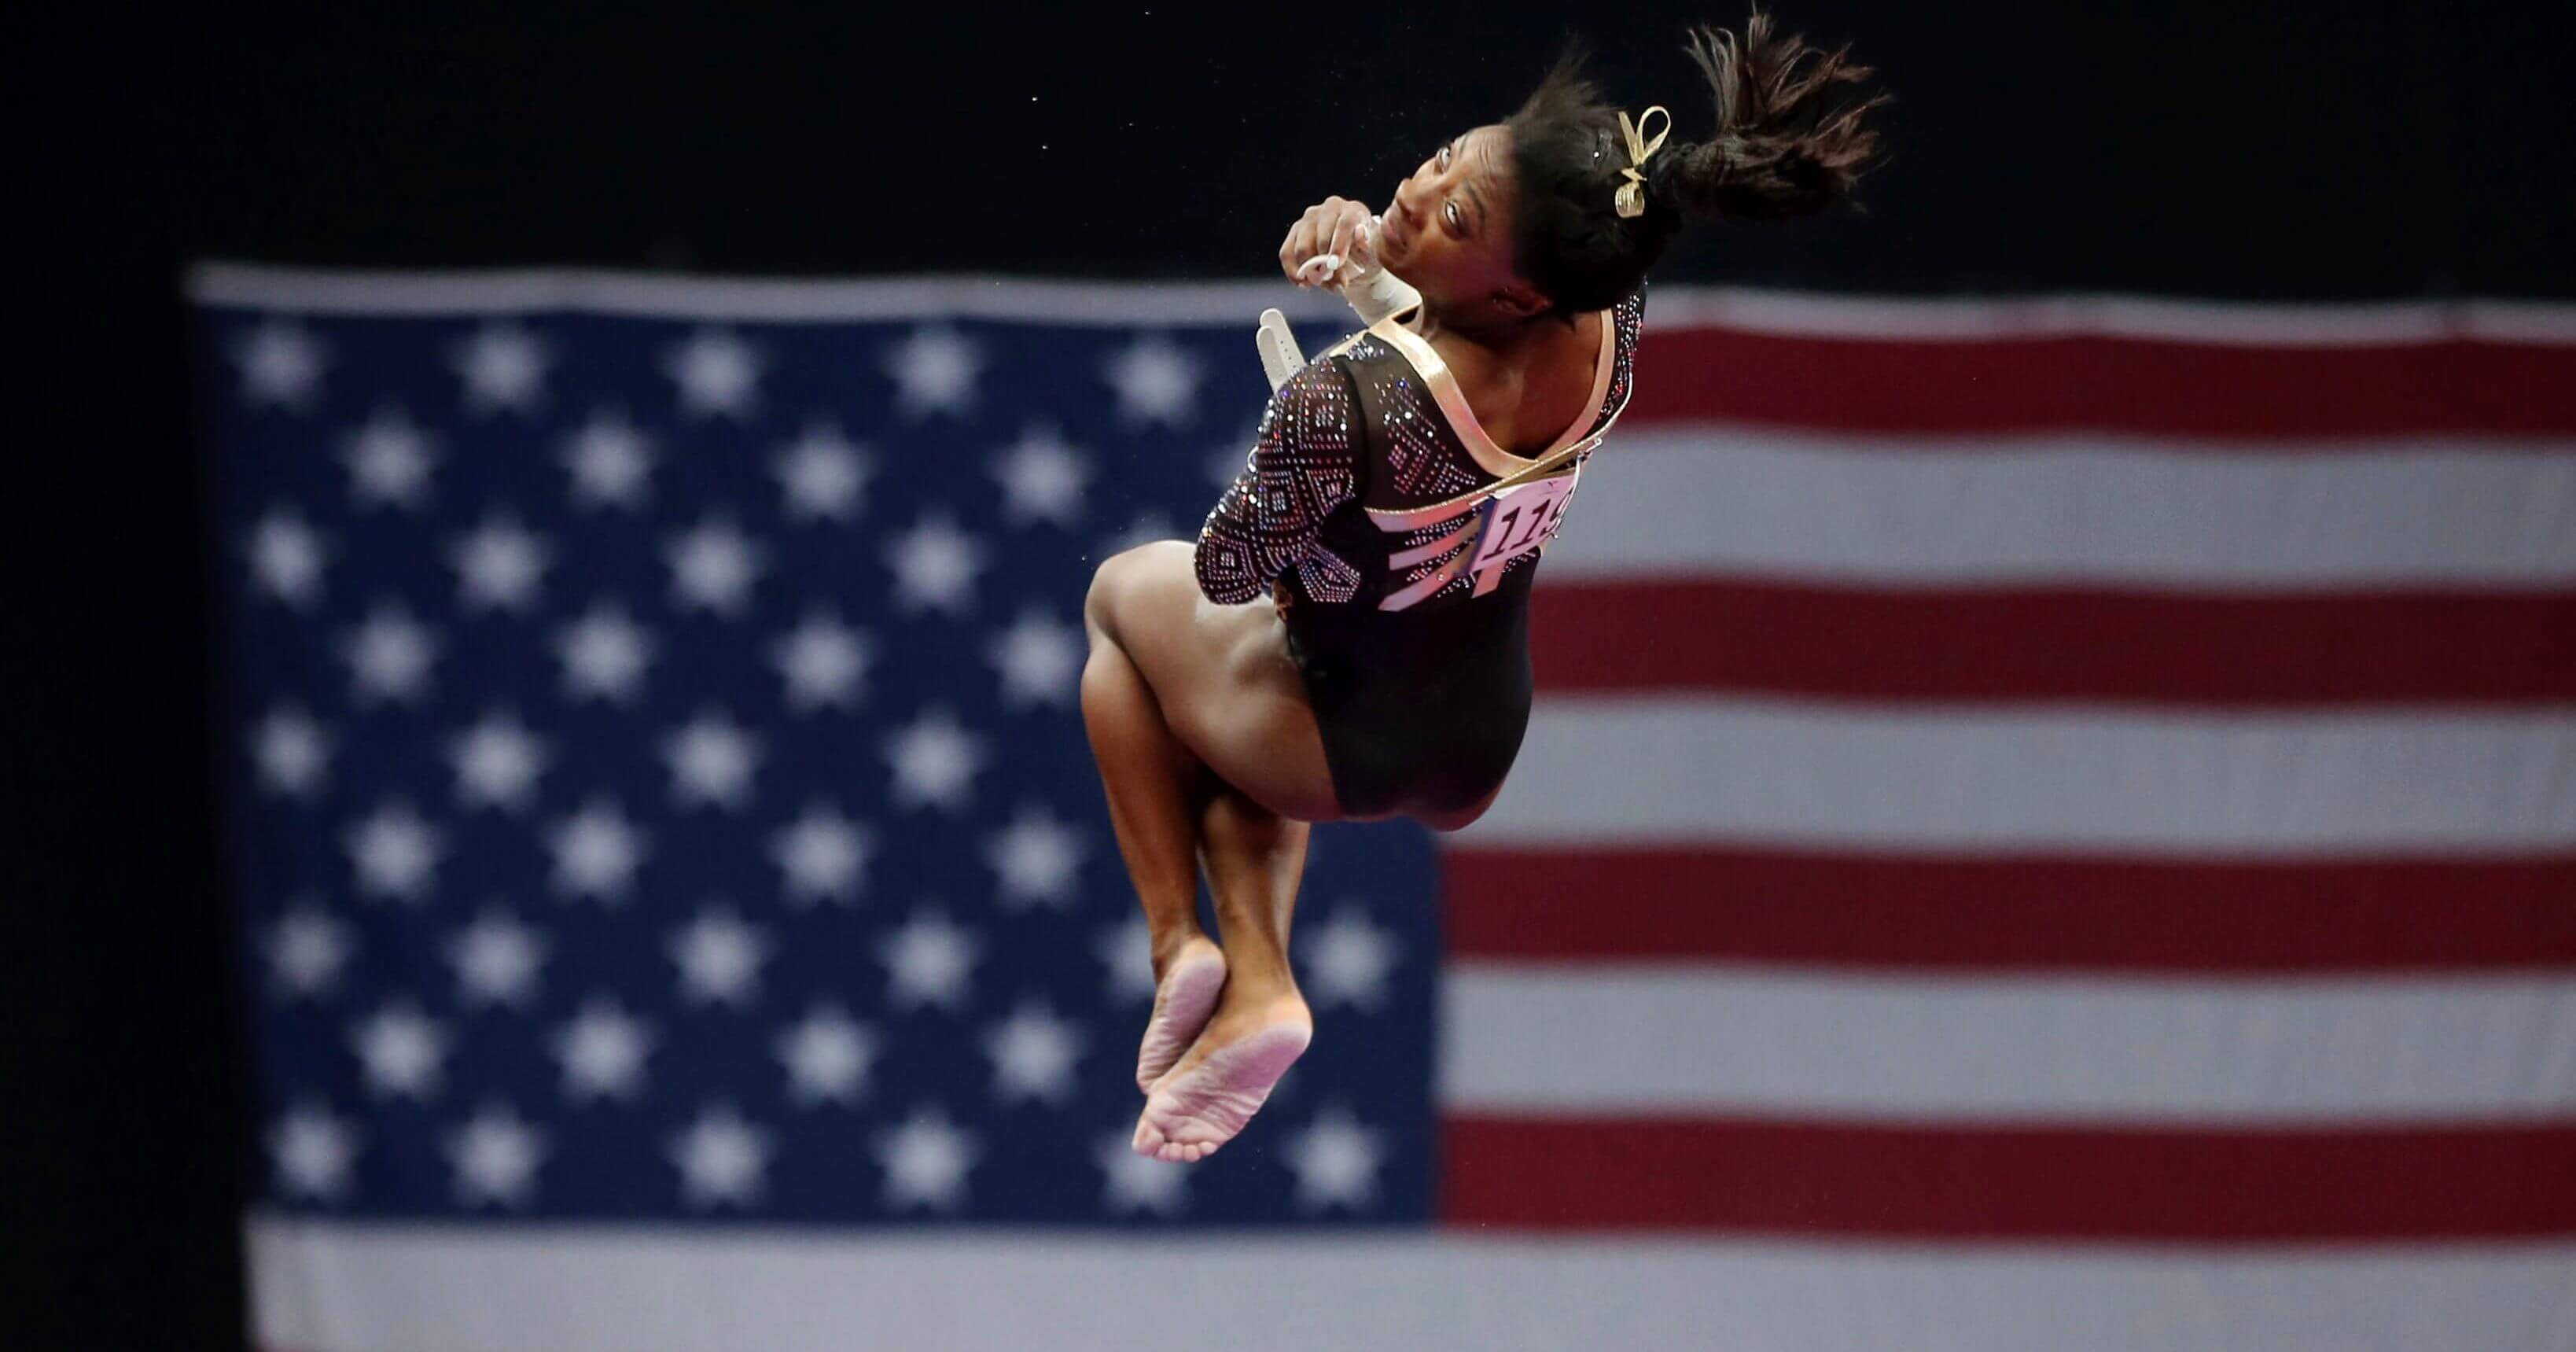 Simone Biles competes on the uneven bars at the U.S. Gymnastics Championships, Friday in Boston.